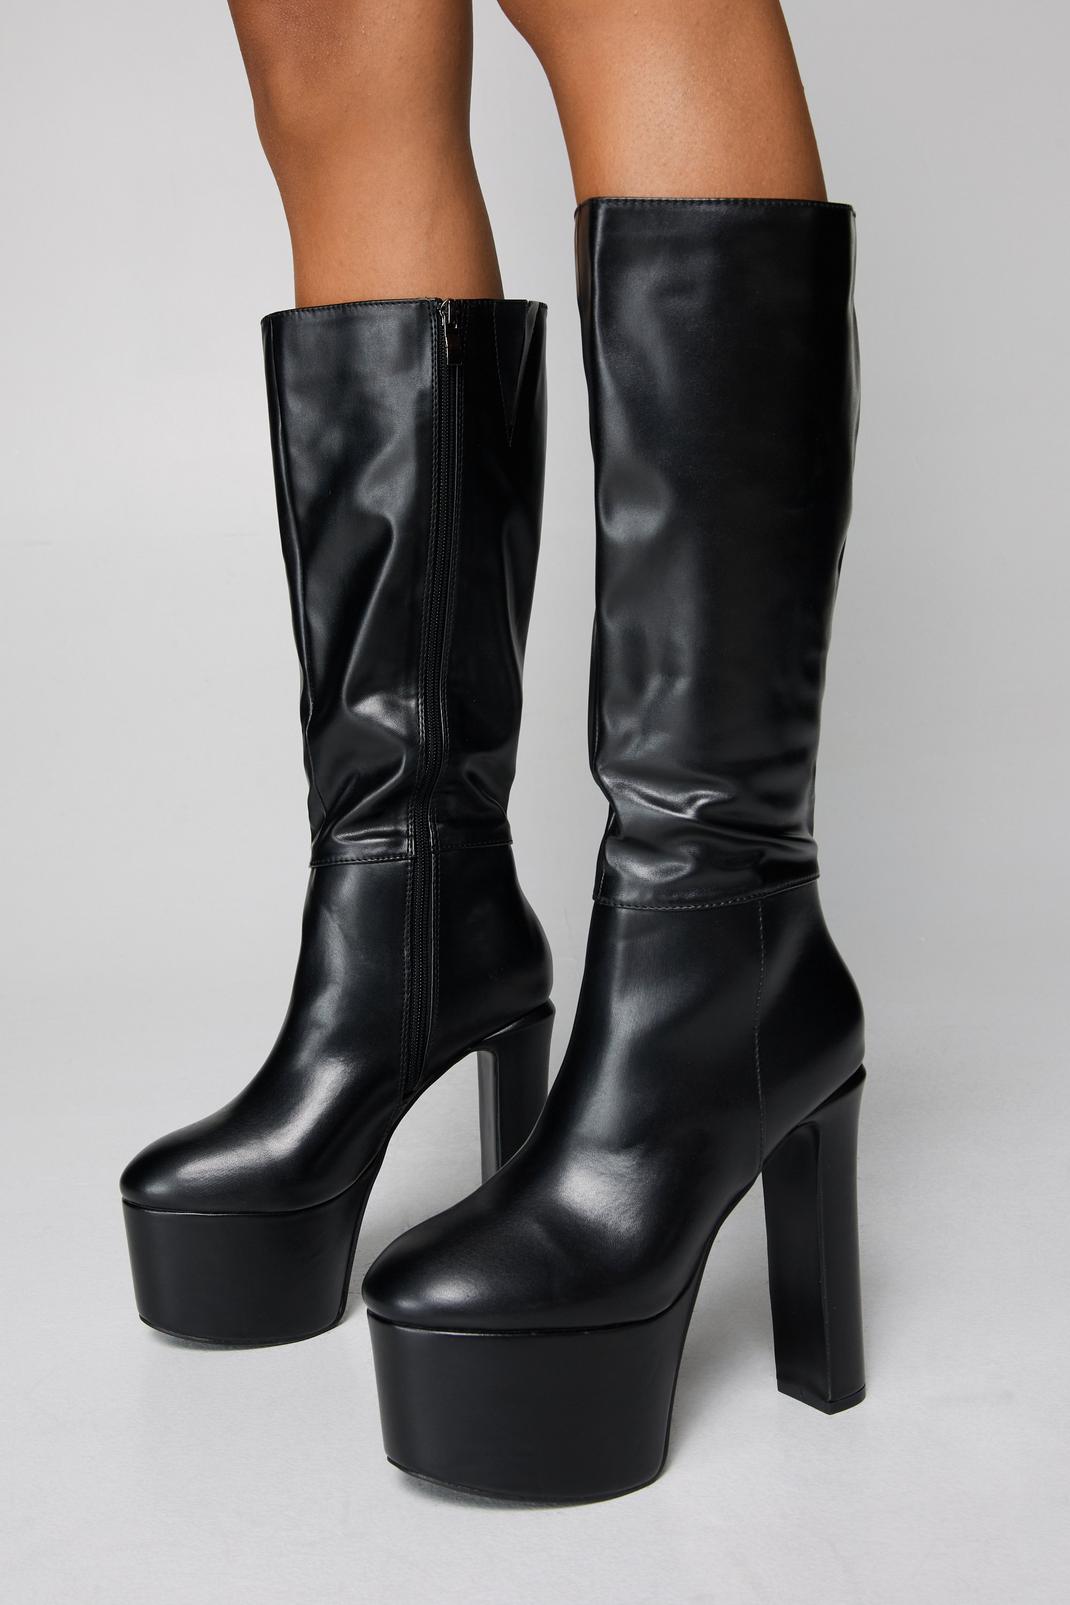 Faux Leather Extreme Platform Knee High Boots | Nasty Gal